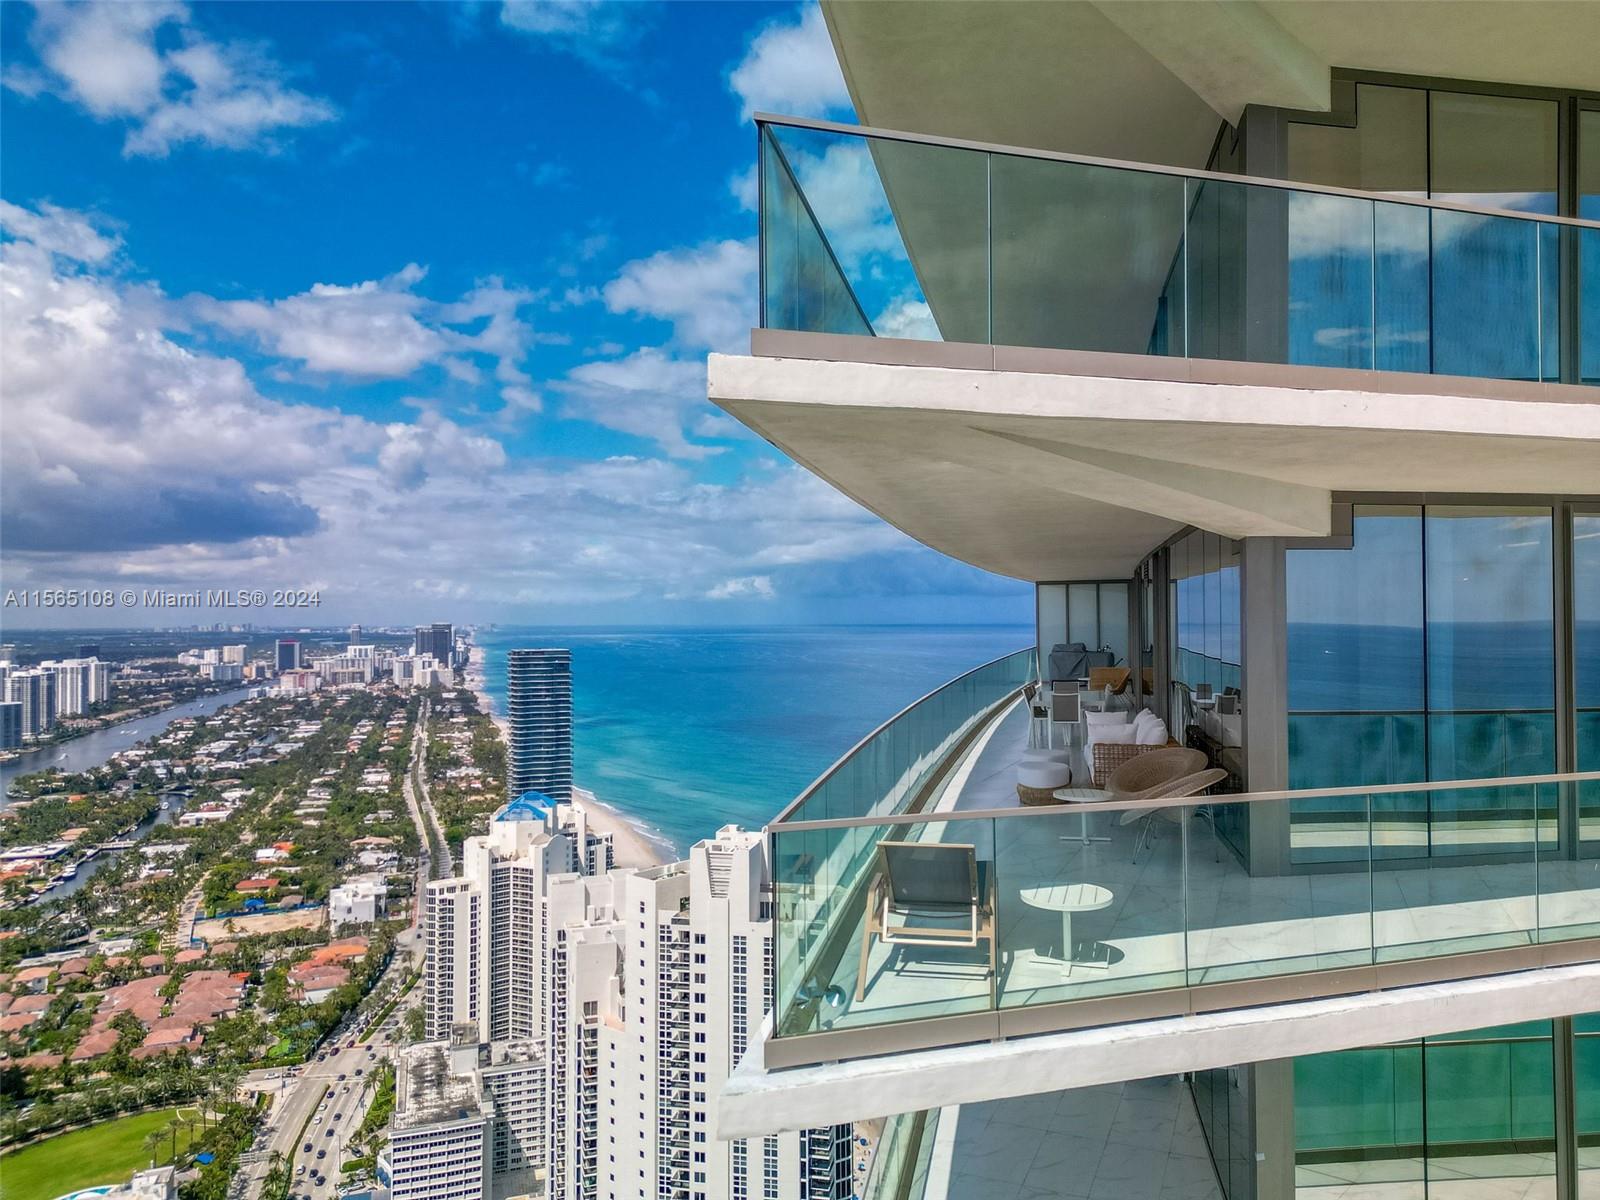 Indulge in luxury living at this beautifully furnished two-bedroom, two-bathroom residence at Armani Casa in Sunny Isles Beach. Offering a generous 1,400+ SqFt. of living space, and over 1,000 SqFt. of balcony space, adorned with a sleek barbecue, every detail exudes a sense of elegance. Breathtaking views of both the ocean and intracoastal from this high-floor flow-through unit as well as direct ocean views from your private beach Cabana. The epitome of sophistication, the unit boasts Subzero/Wolf appliances, Toto toilet, 10-ft ceilings, and a private foyer. Armani Casa features unparalleled amenities including a private restaurant/bar, spa, movie theater, heated pool, cigar room, playground, fitness center, direct beach access and more. Experience seaside sophistication at its finest!